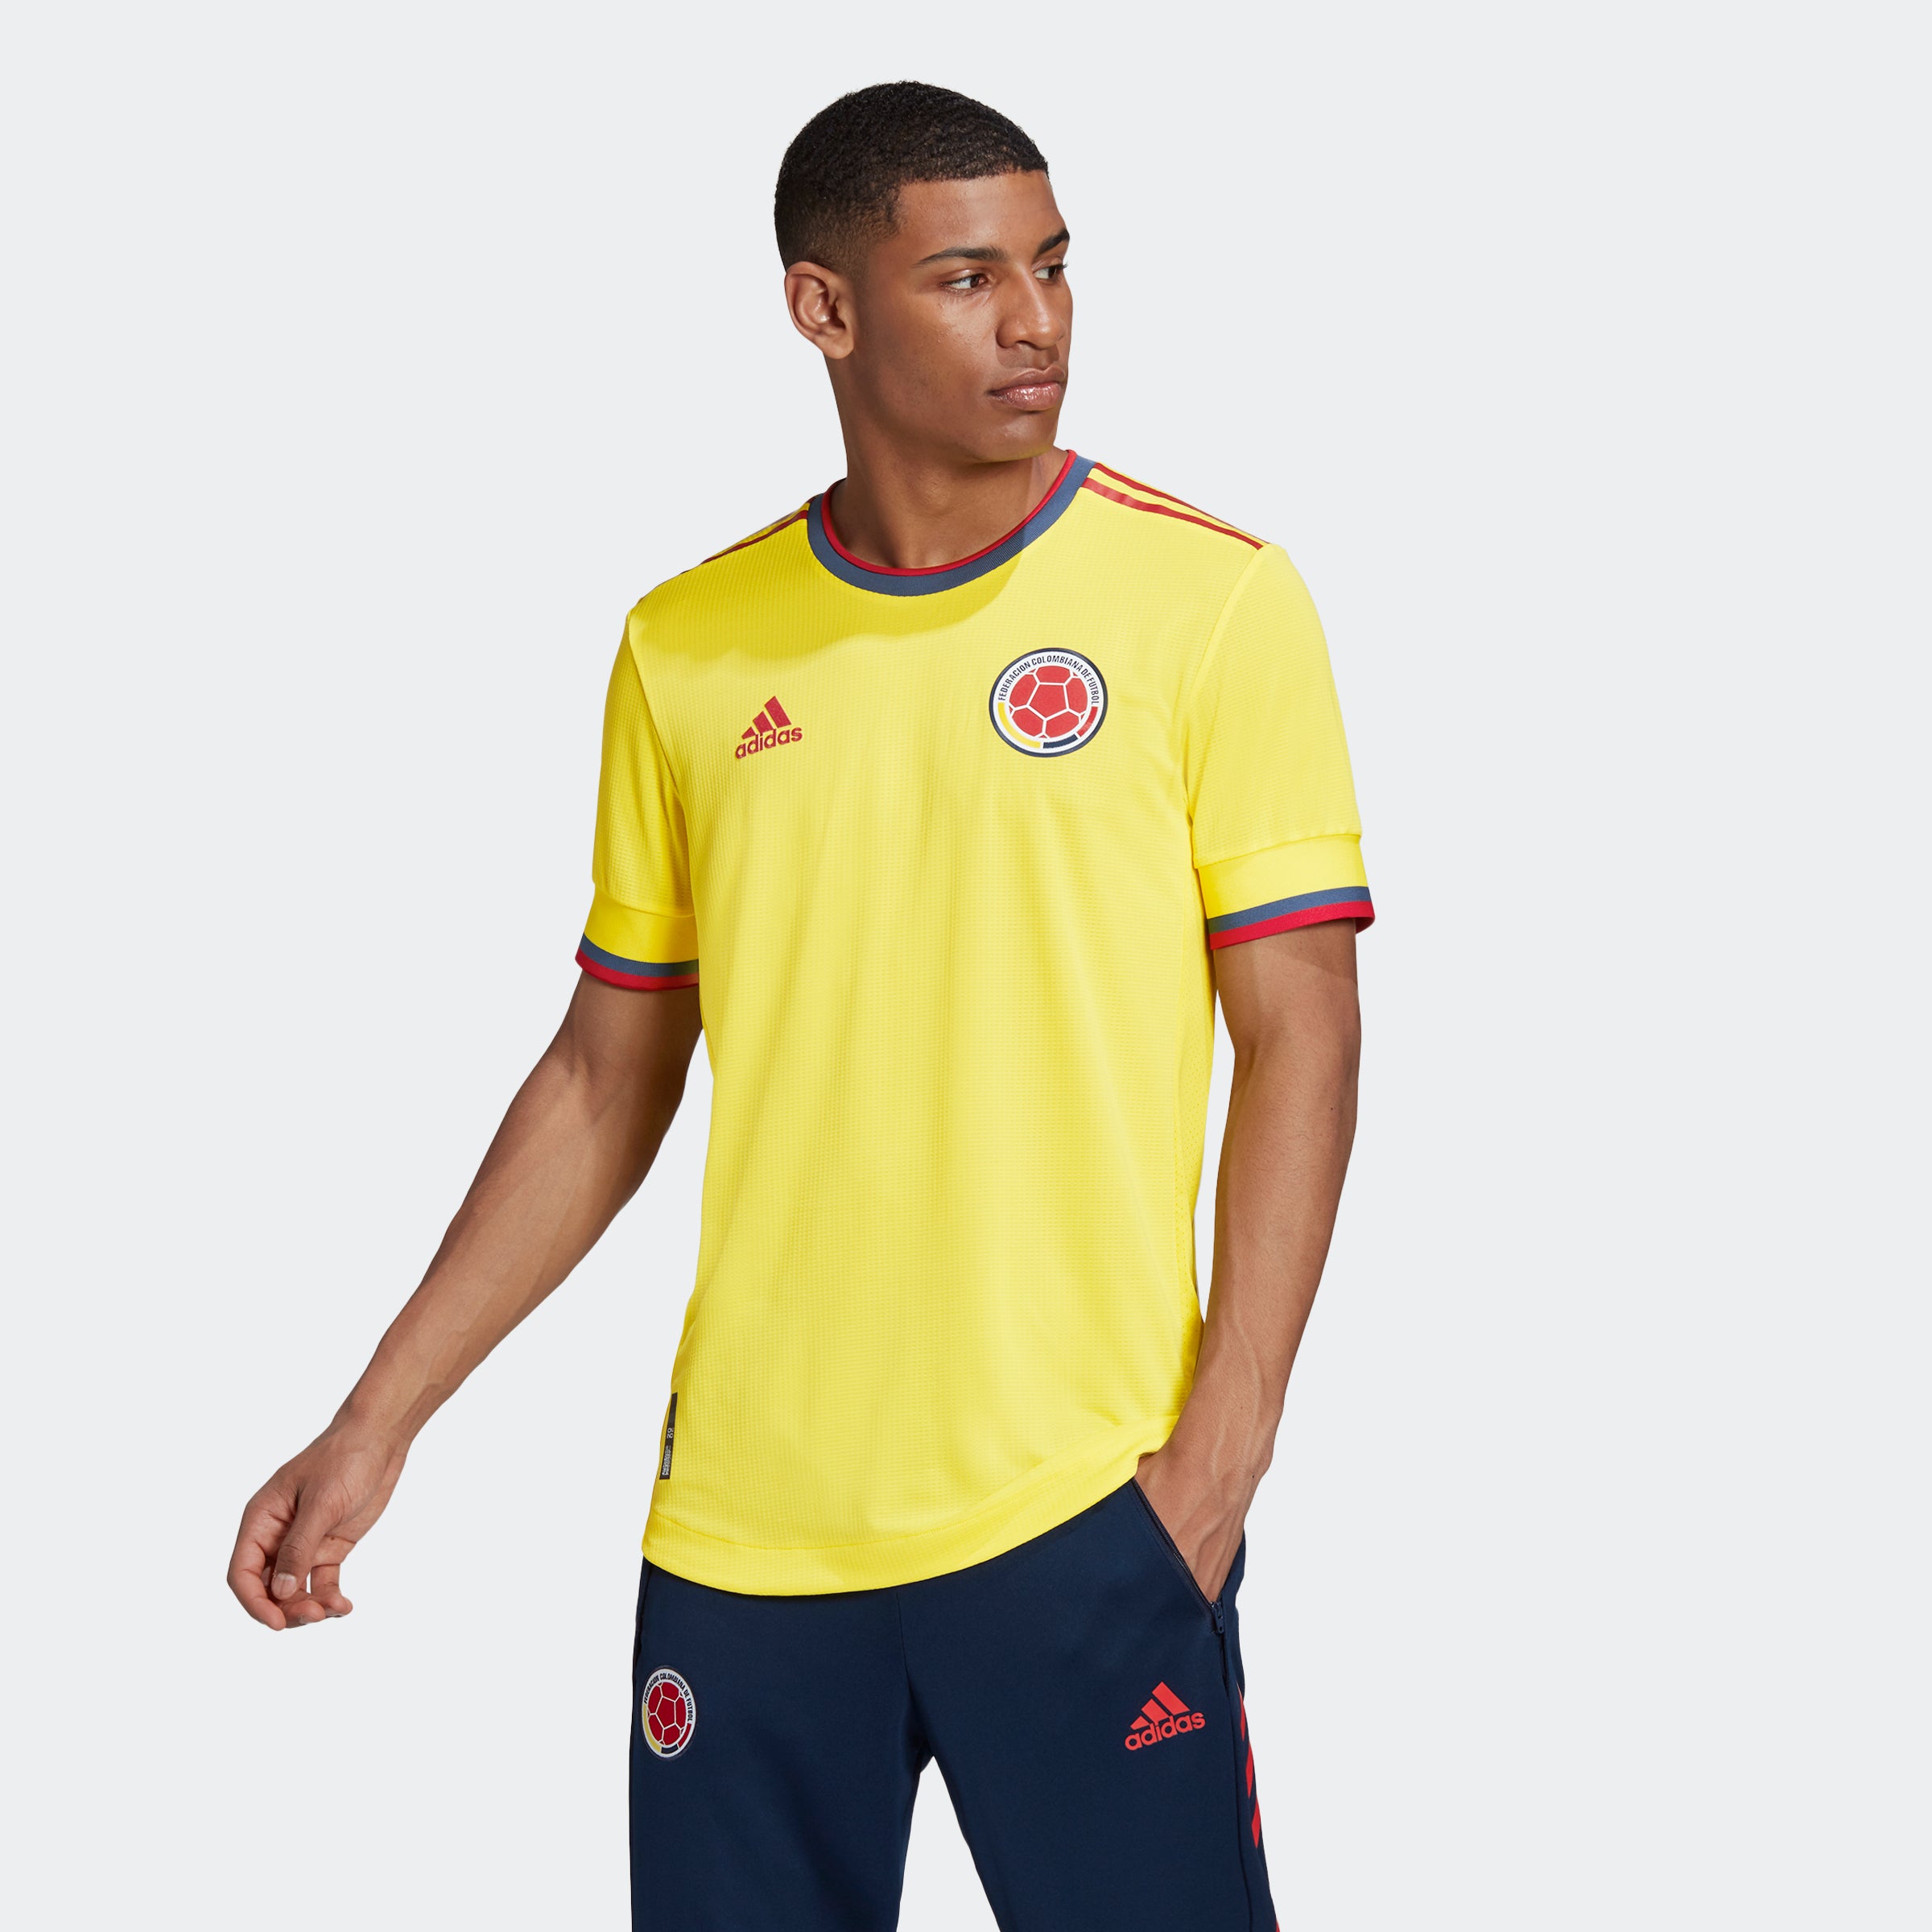 Adidas Youth Colombia '22 Home Replica Jersey, Kids, Medium, Yellow